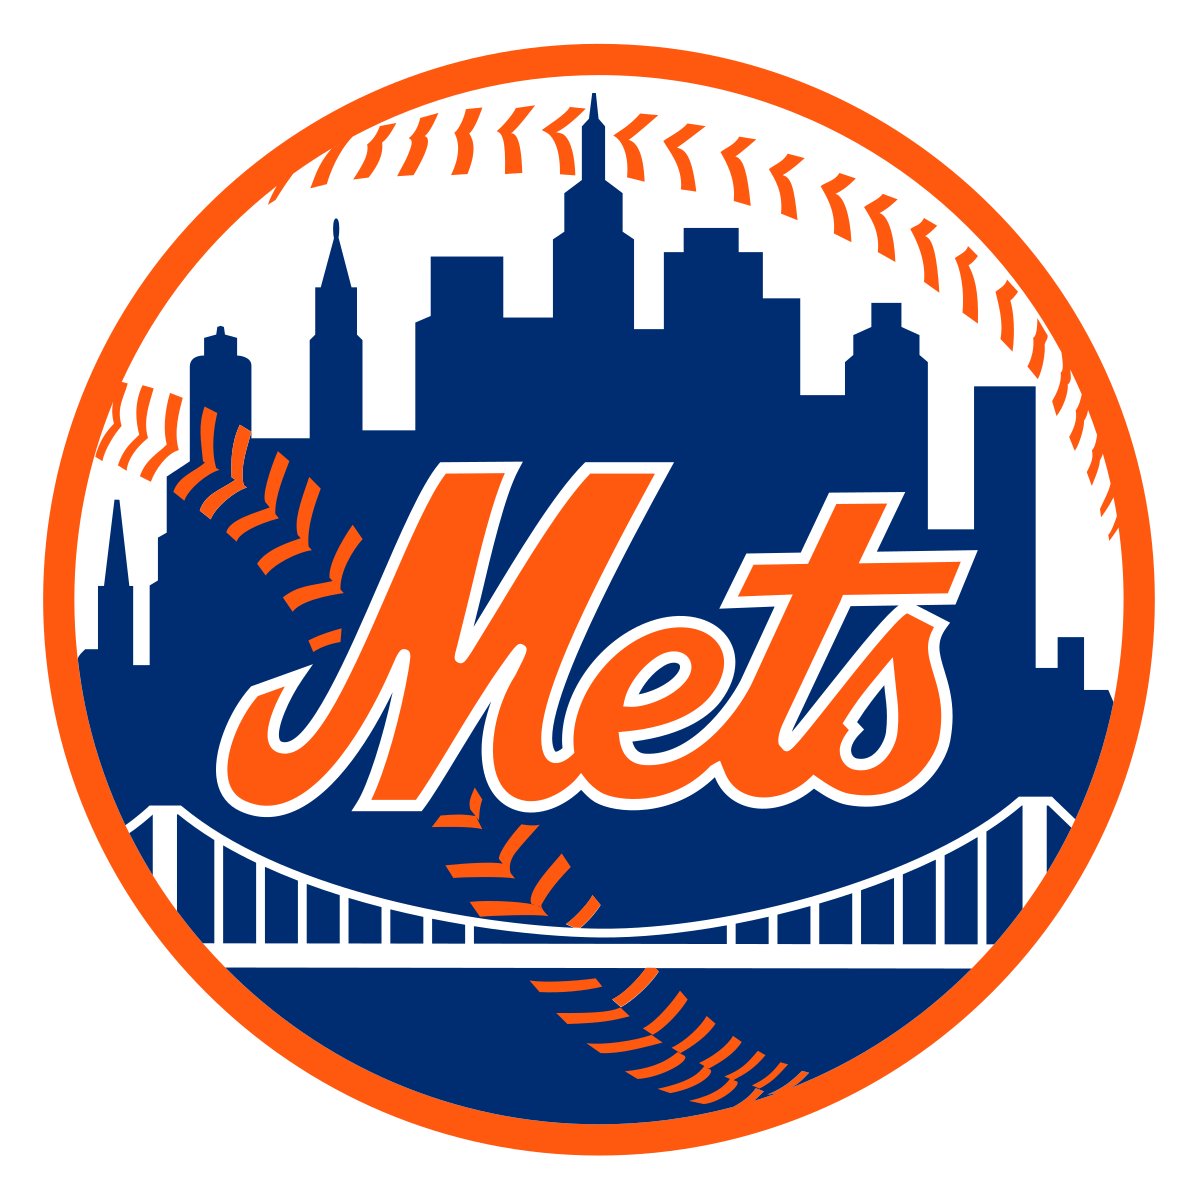 THIS THURSDAY 3.28 we open at 1PM for Mets Opening Day 2024! Come watch the Mets host the Milwaukee Brewers to open their 2024 season at Citi Field! Let's do this #LGM !!!! #gebhardsbeerculture #craftbeer #upperwestside #metsfans #mets #metsopeningday #metsopeningday2024